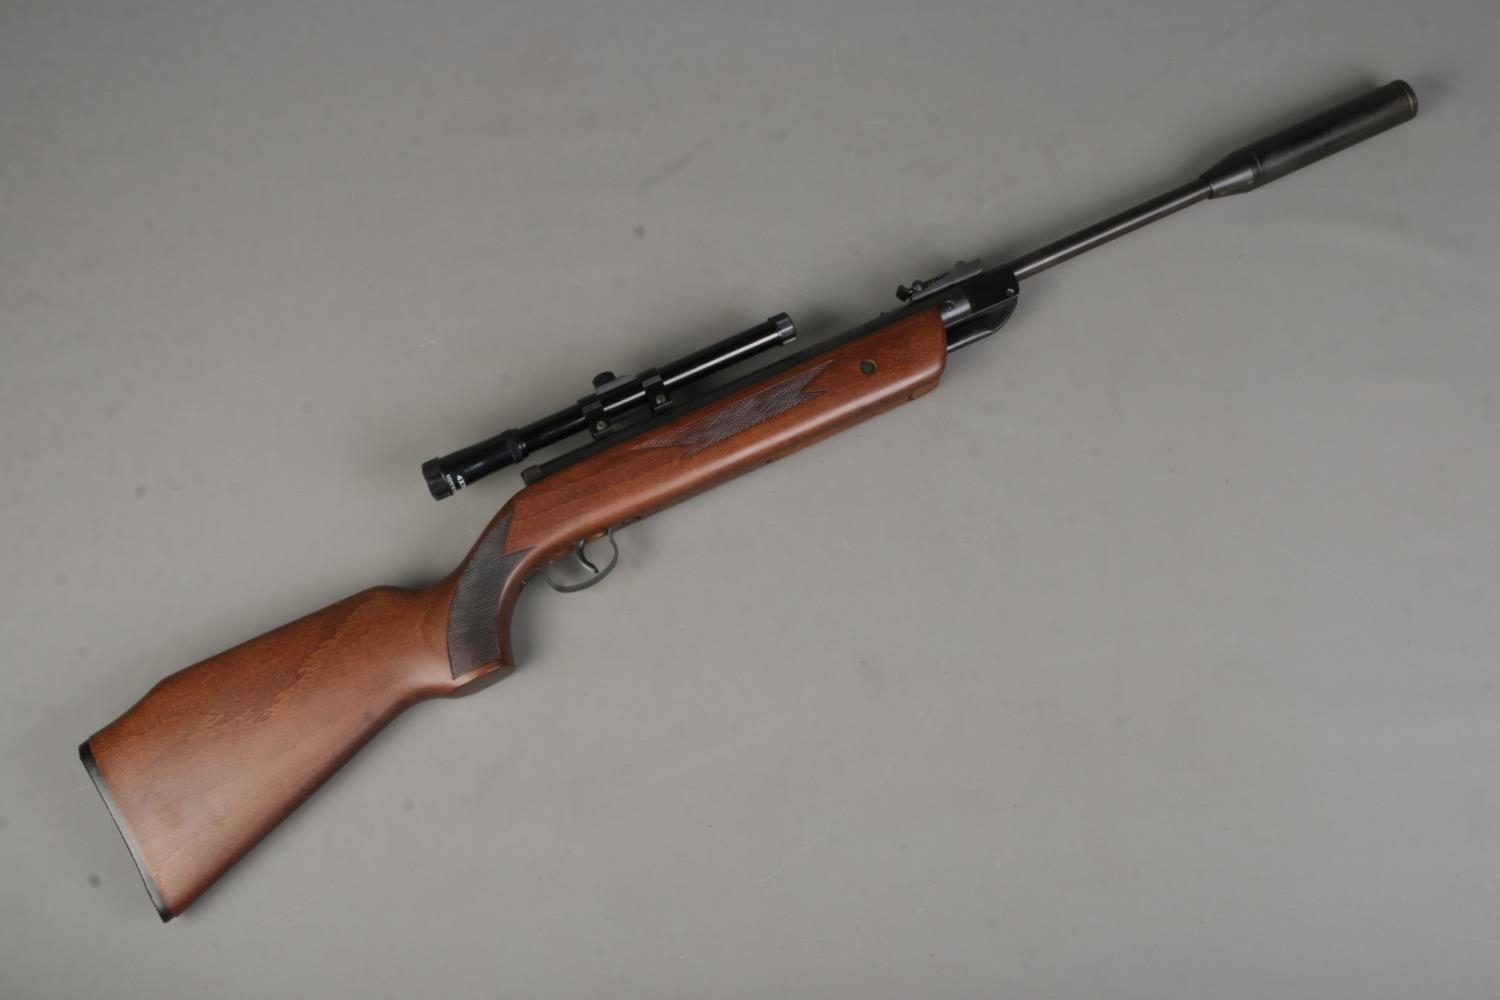 West Lake break barrel lever action .22 air rifle with scope. CANNOT POST